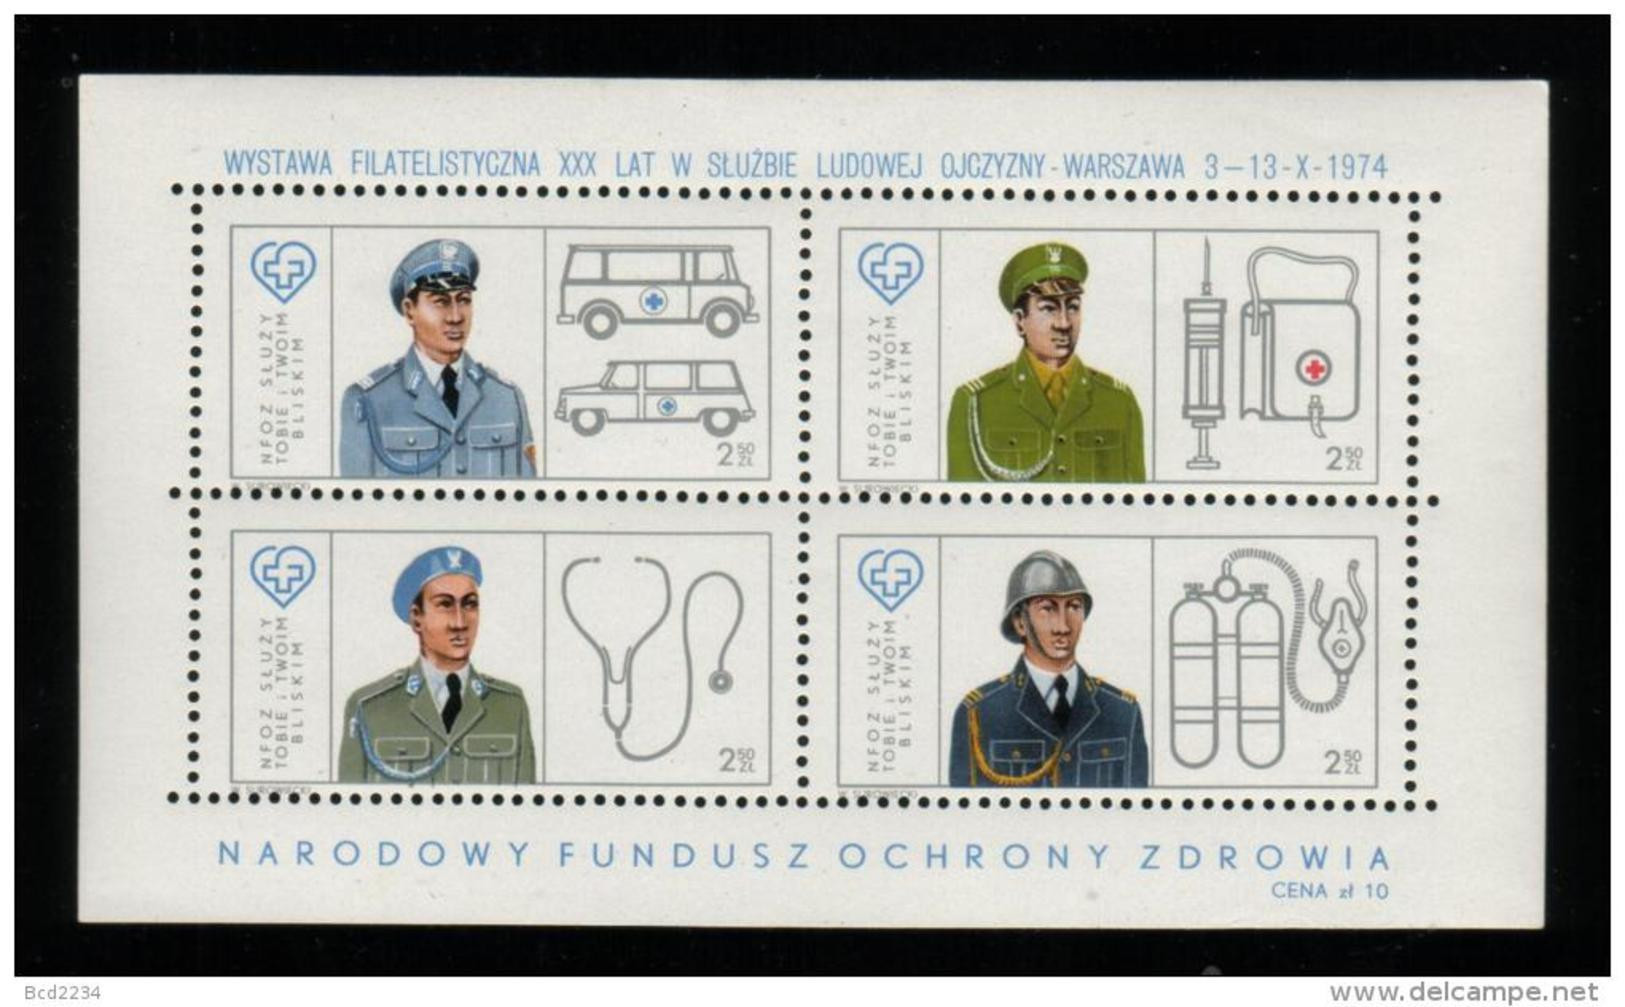 POLAND 1974 30 YEARS SERVING NATION NATIONAL HEALTH FUND PHILATELIC EXPO S/S NHM MEDICINE AMBULANCE HEART DOCTOR POLICE - Accidentes Y Seguridad Vial